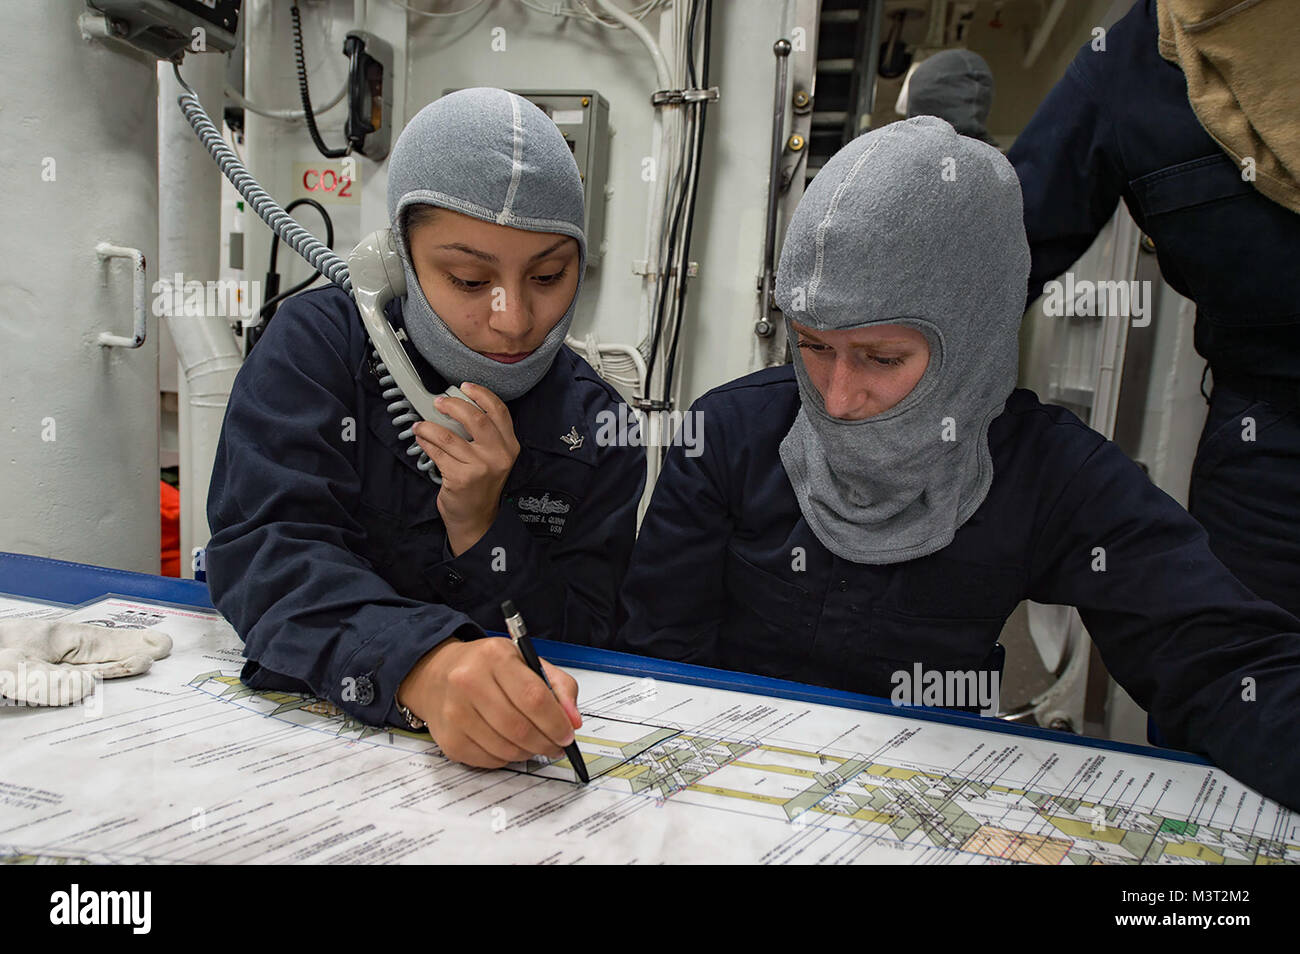 160311-N-MD297-088 PACIFIC OCEAN (March 11, 2016) - Yeoman Seaman Christine Quinn, left, and Gas Turbine Systems Technician (Mechanical) Fireman Dickie updates a damage control chart during a main space fire drill aboard the Arleigh Burke-class guided-missile destroyer USS Lassen (DDG 82). Lassen is deployed to the U.S. 4th Fleet area of responsibility supporting law enforcement operations as part of Operation Martillo. (U.S. Navy photo by Mass Communication Specialist 2nd Class Huey D. Younger Jr./Released) 160311-N-MD297-088 by U.S. Naval Forces Southern Command  U.S. 4th Fleet Stock Photo